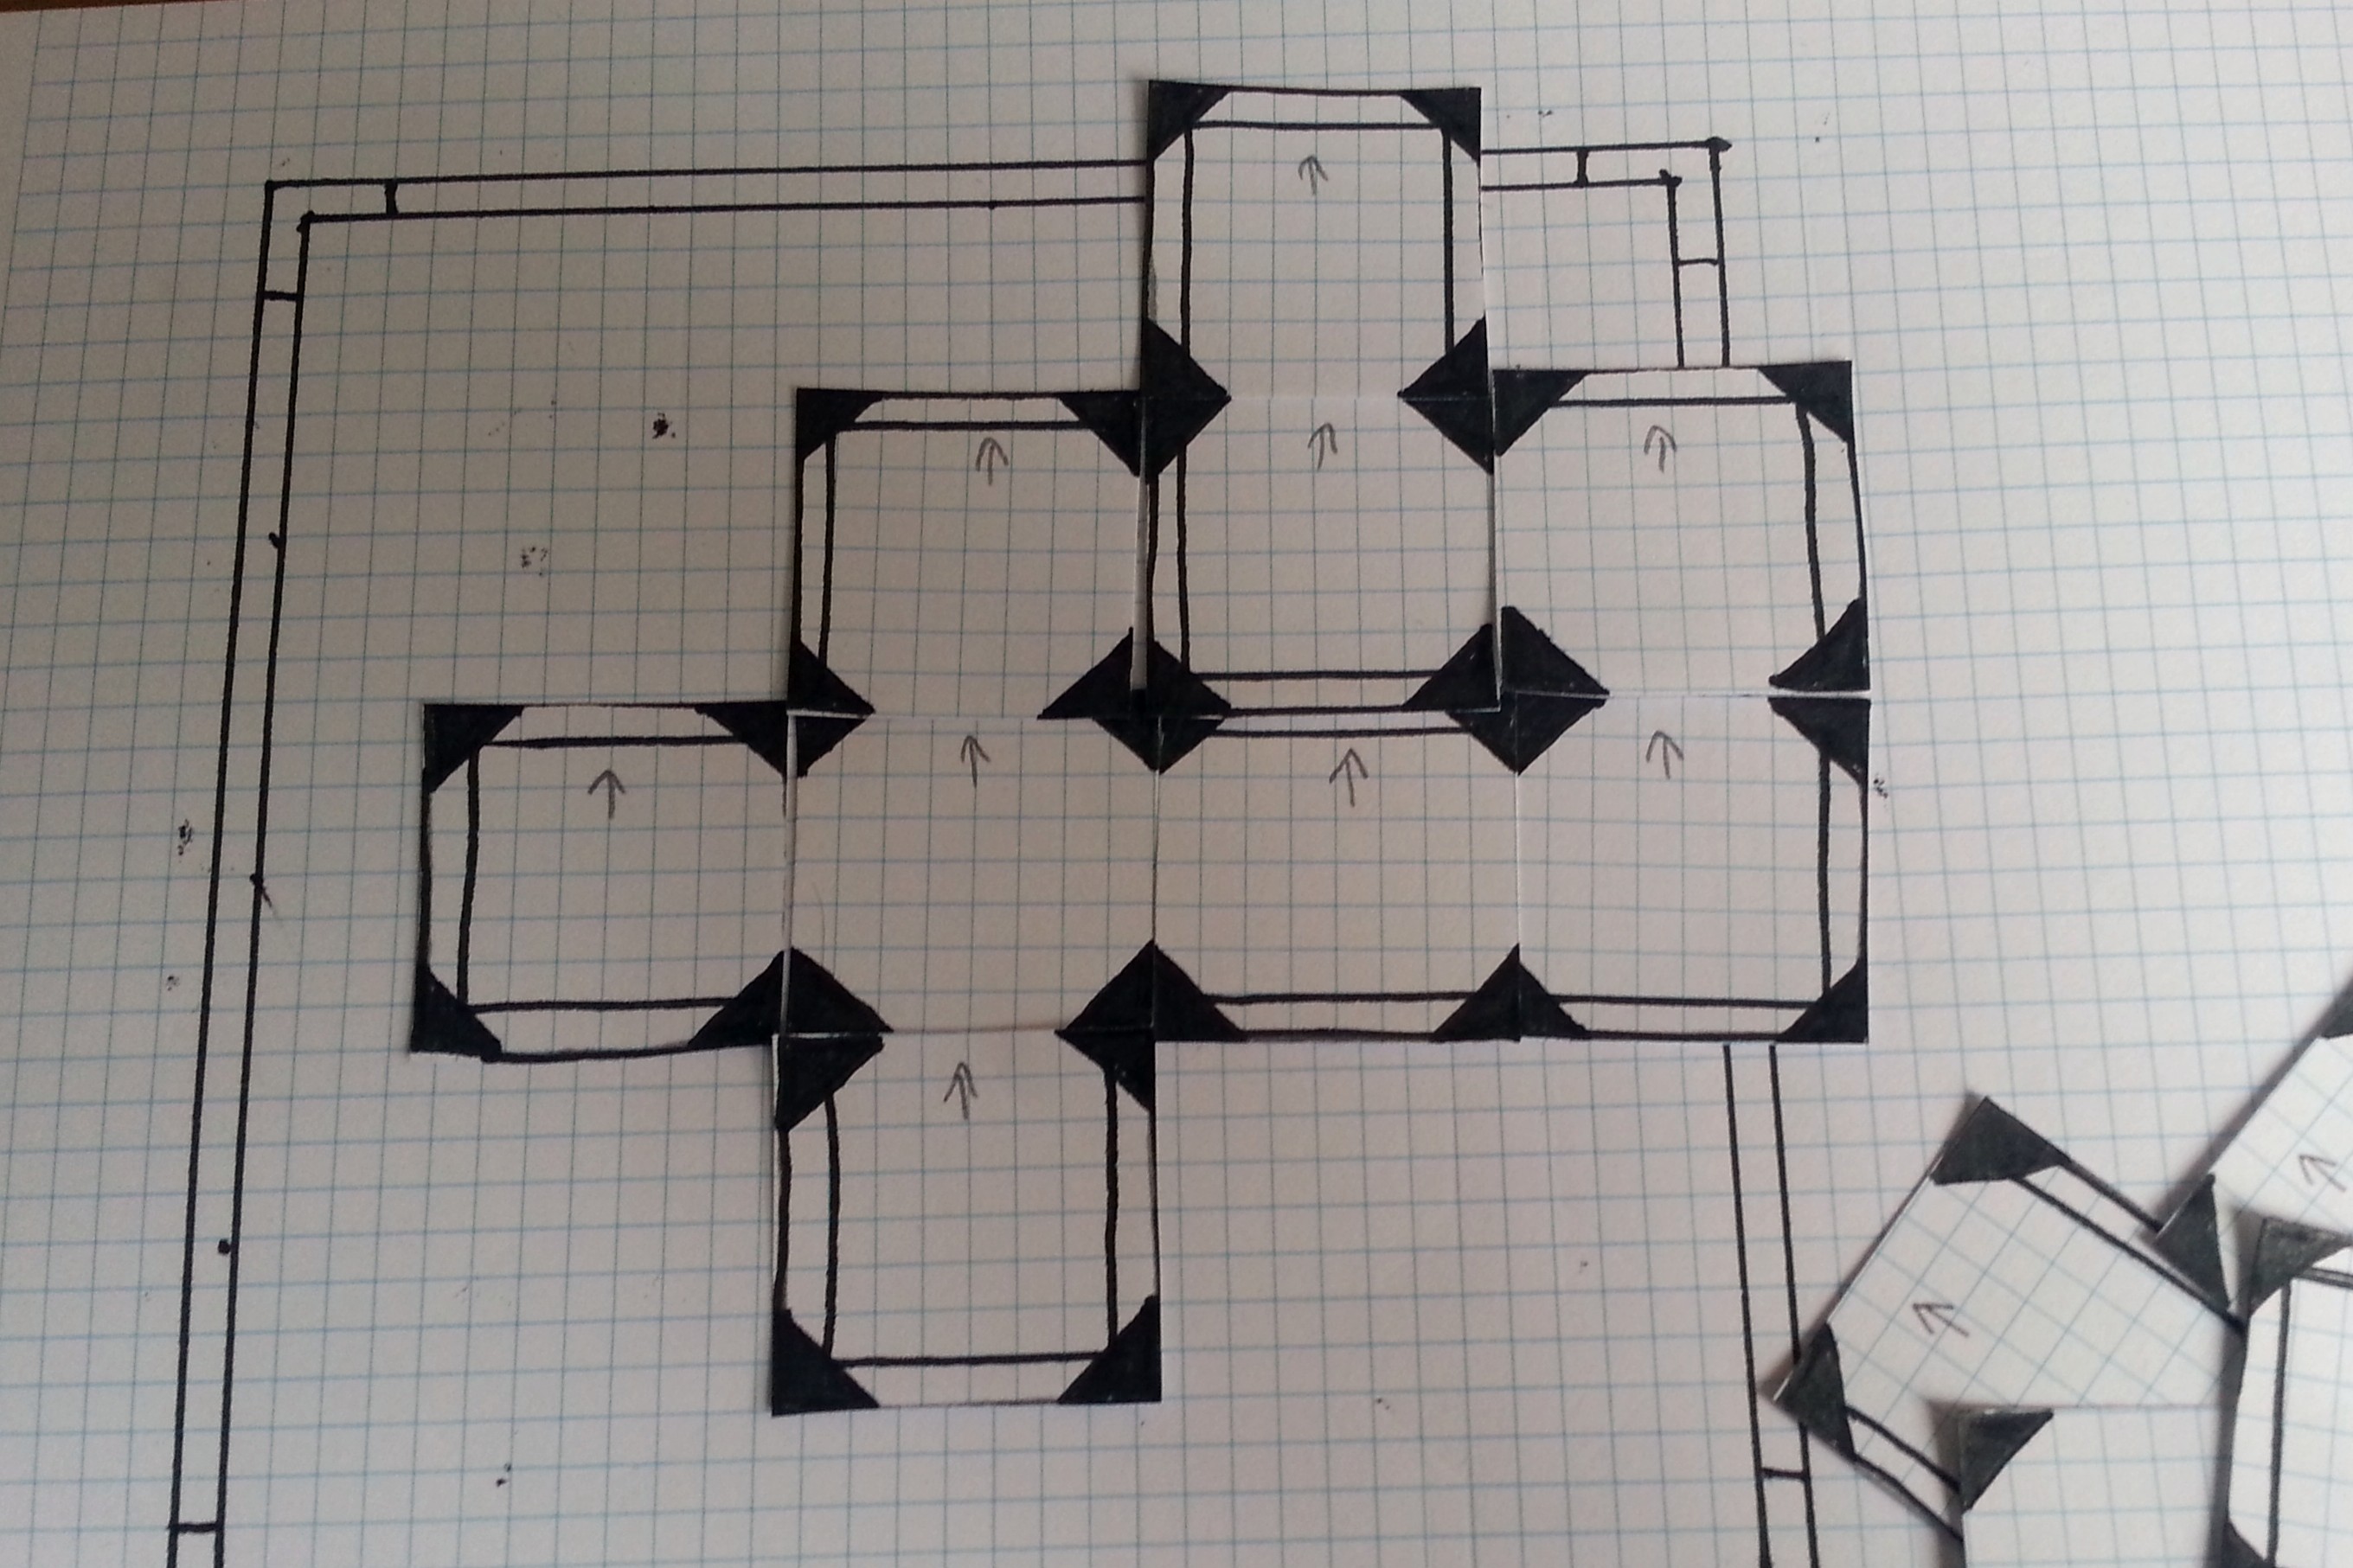 This is not a particularly impressive maze but it does give an idea of how combinations of tiles can come together.